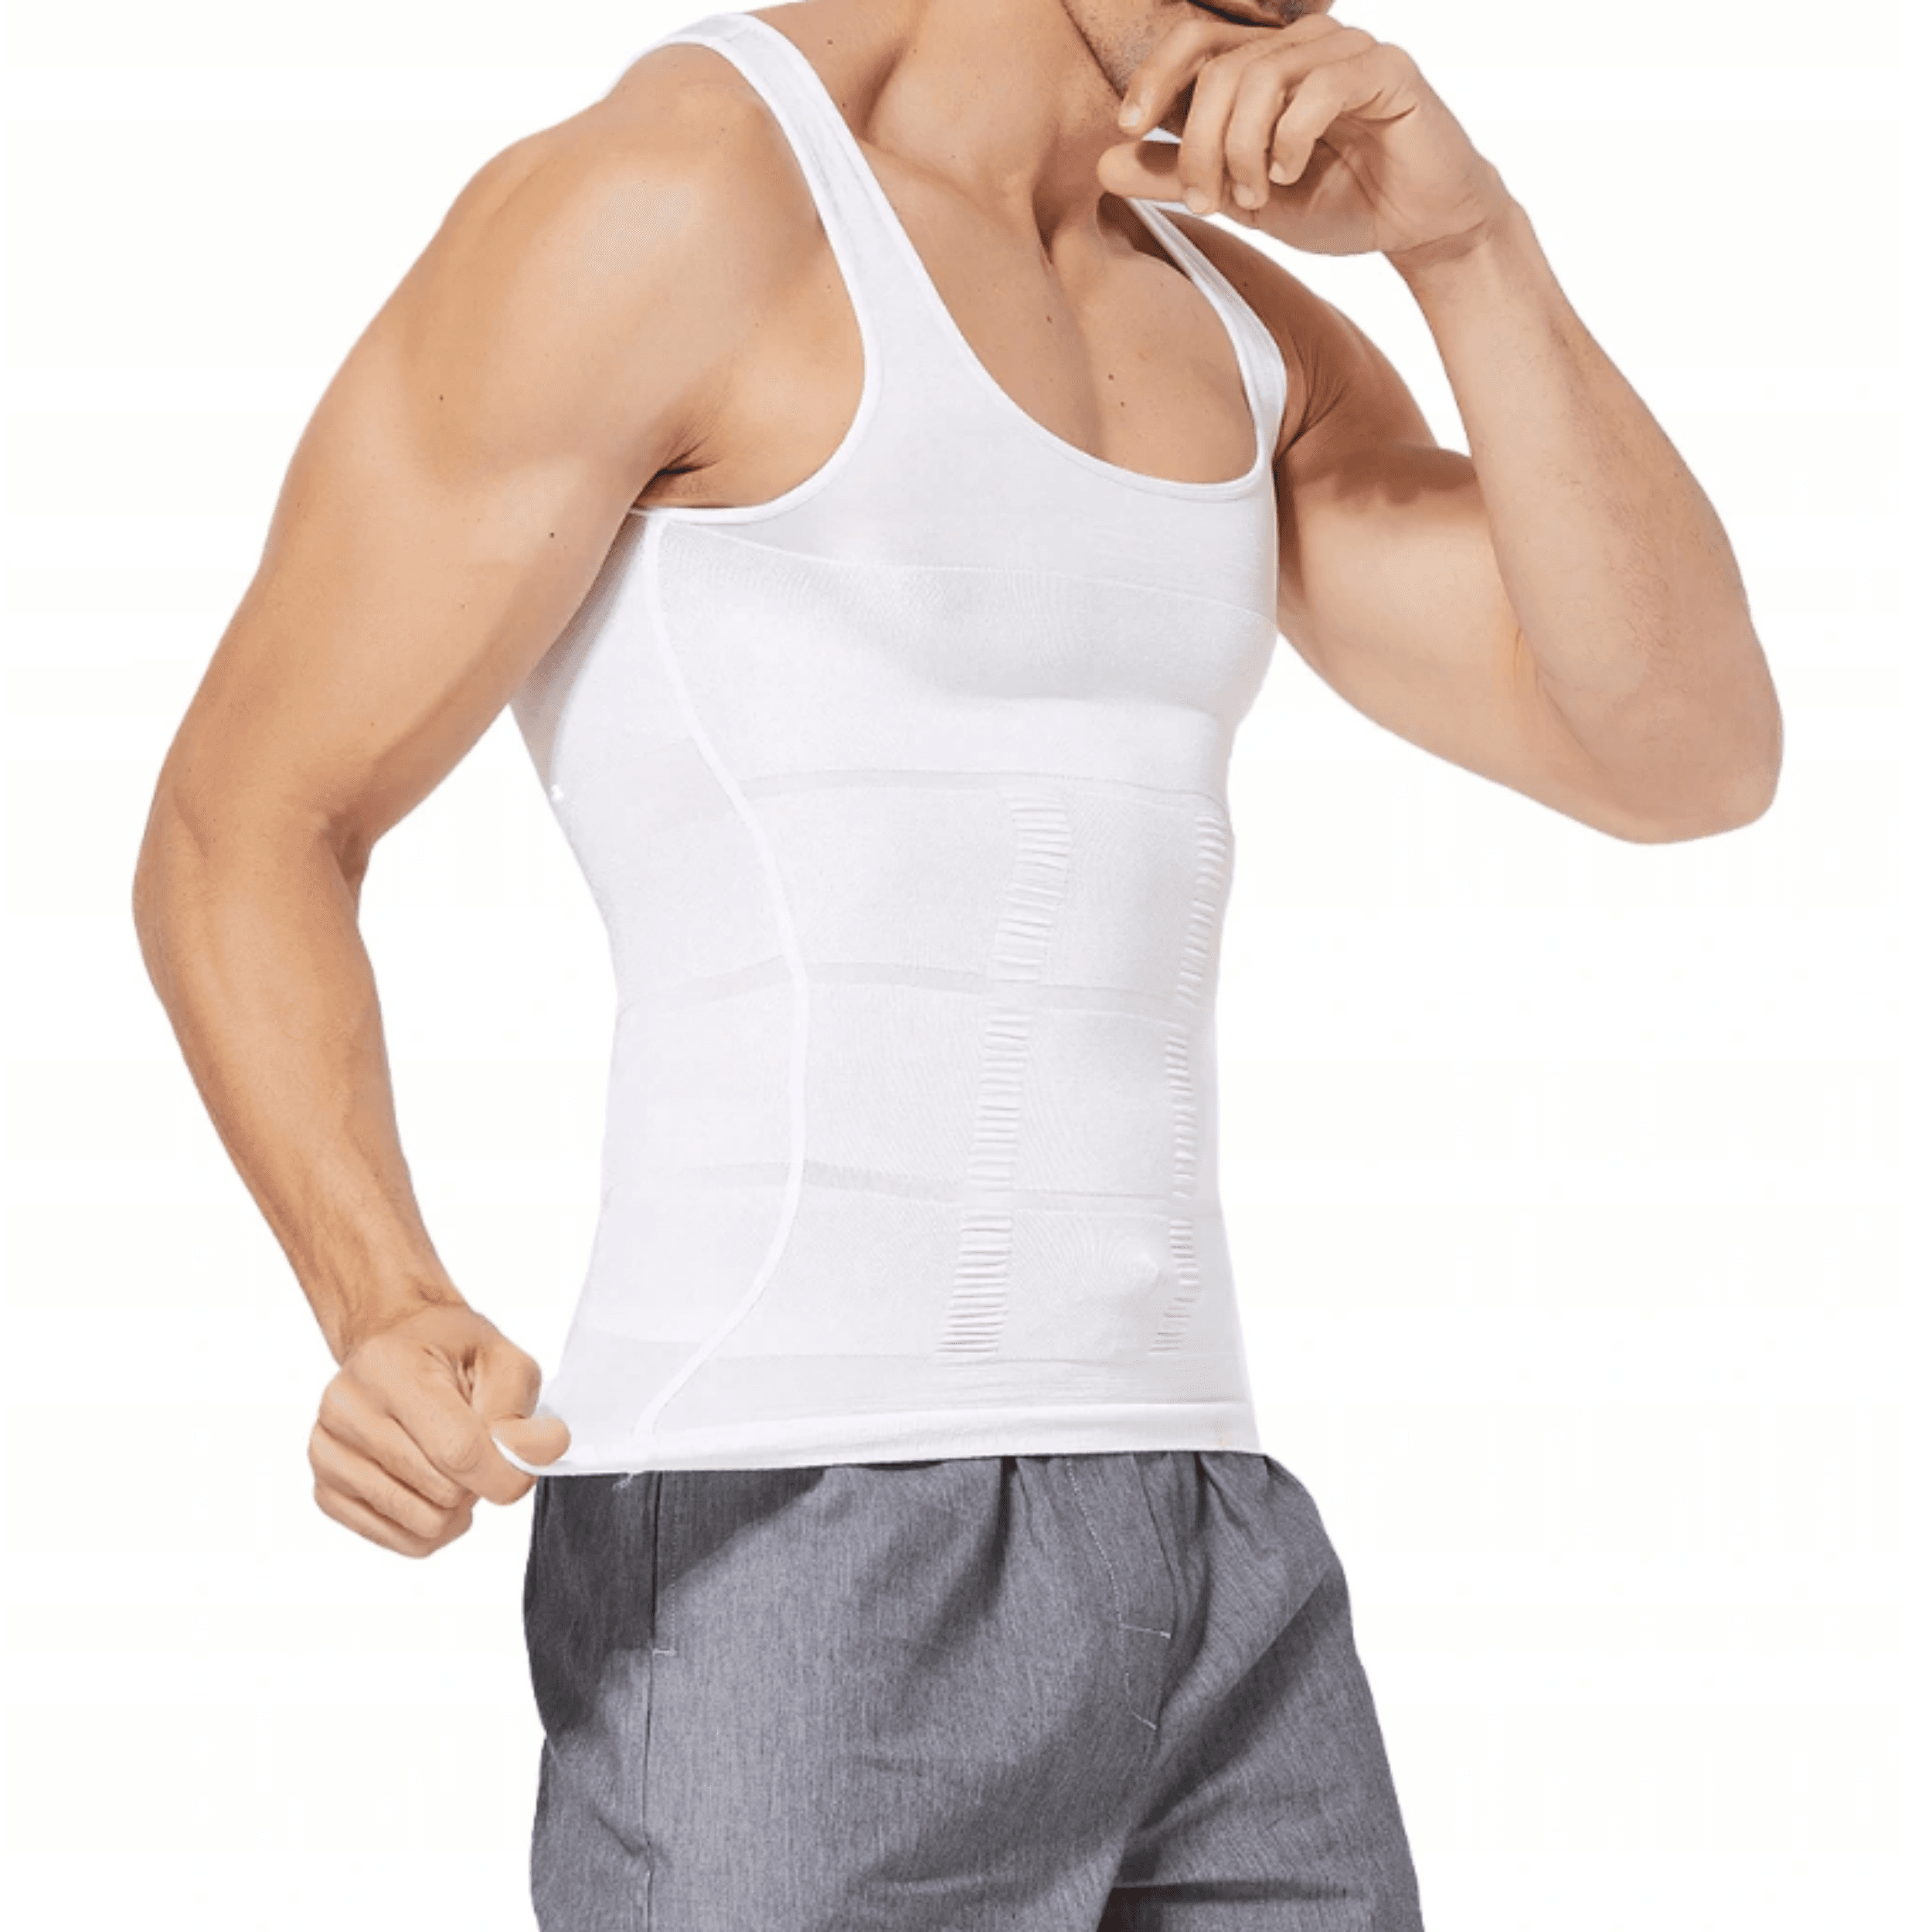 XL men's undershirt - modeling and slimming - strengthening the muscles of the spine